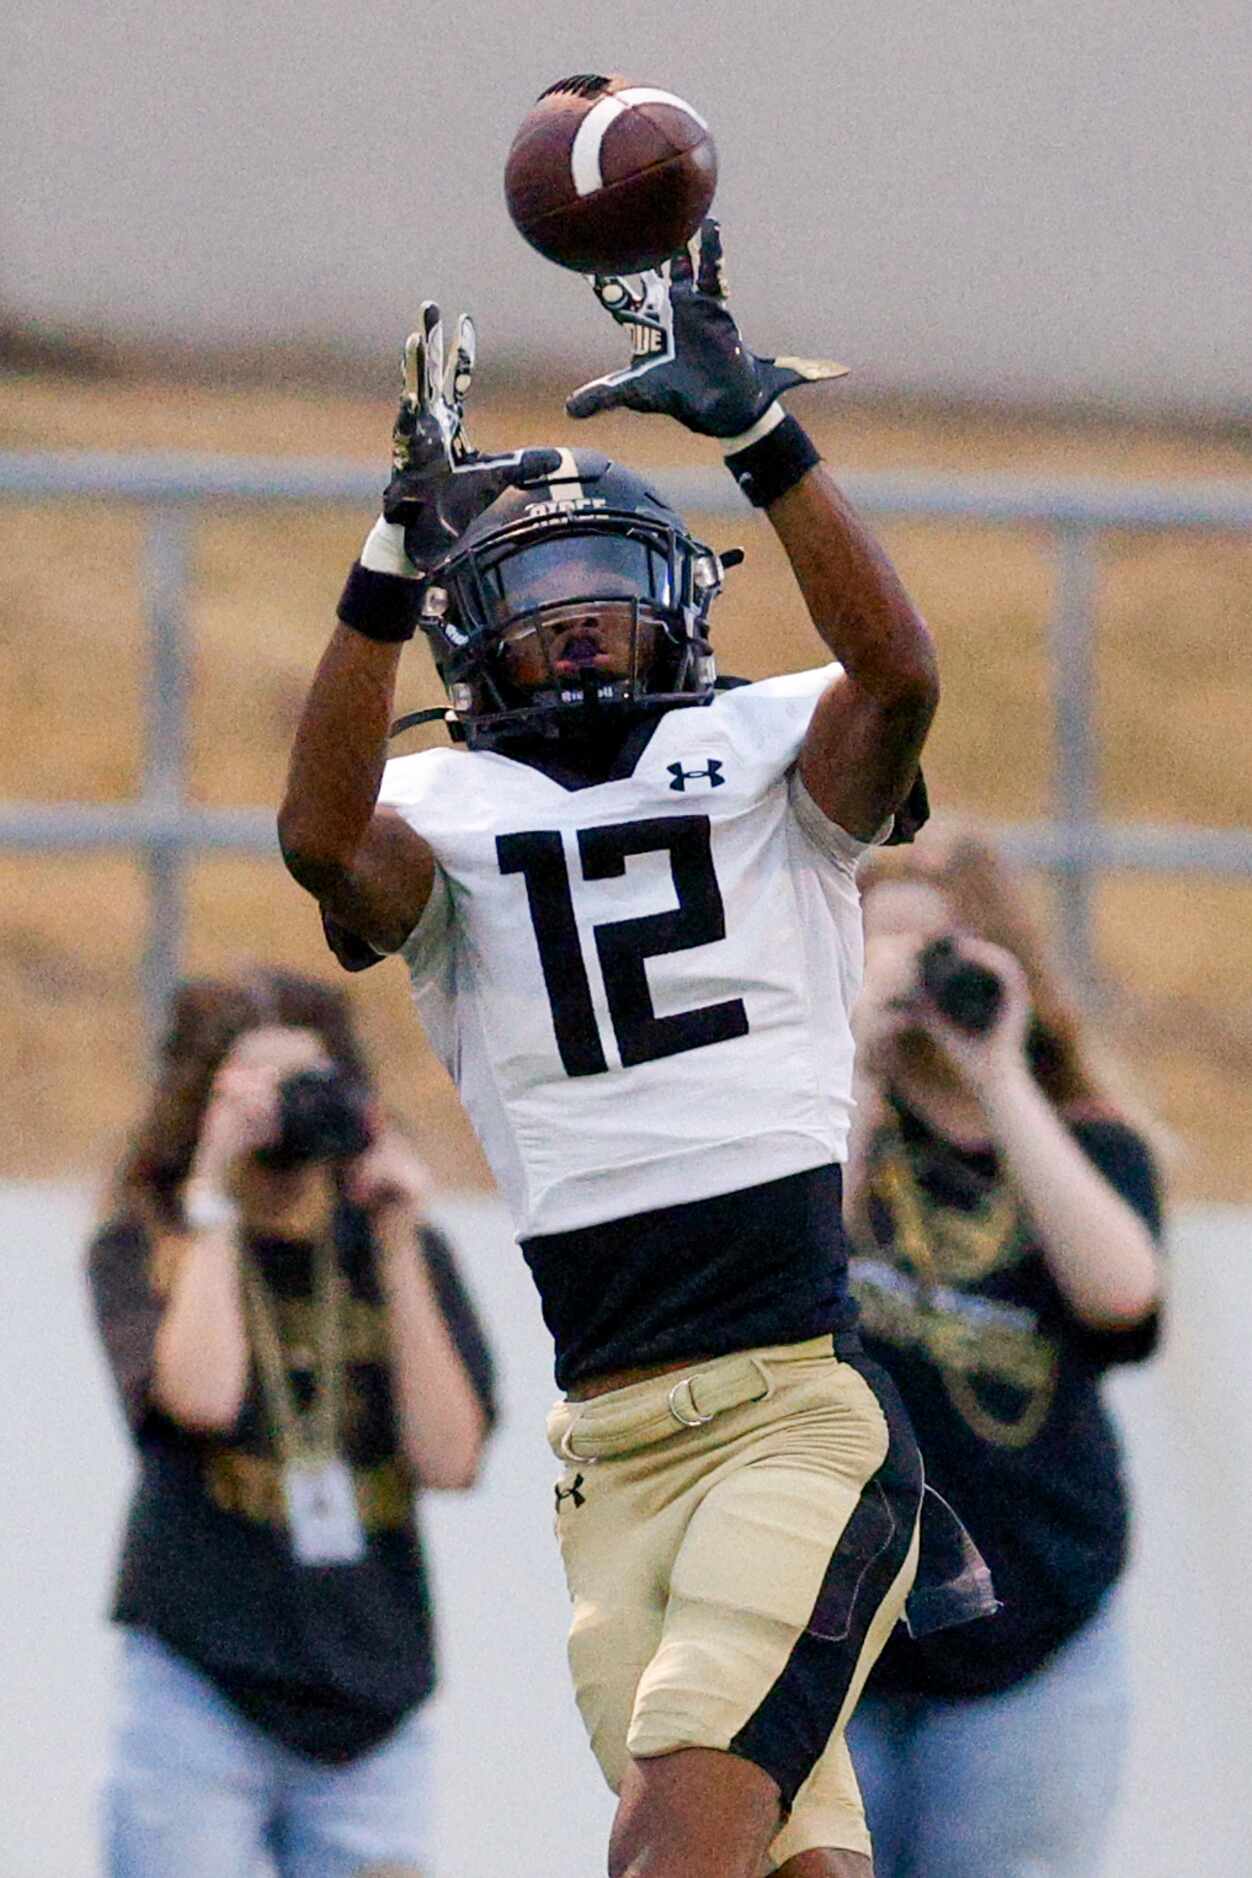 Keller Fossil Ridge wide receiver X’zavion Branch-Dunacn (12) makes a catch during the first...